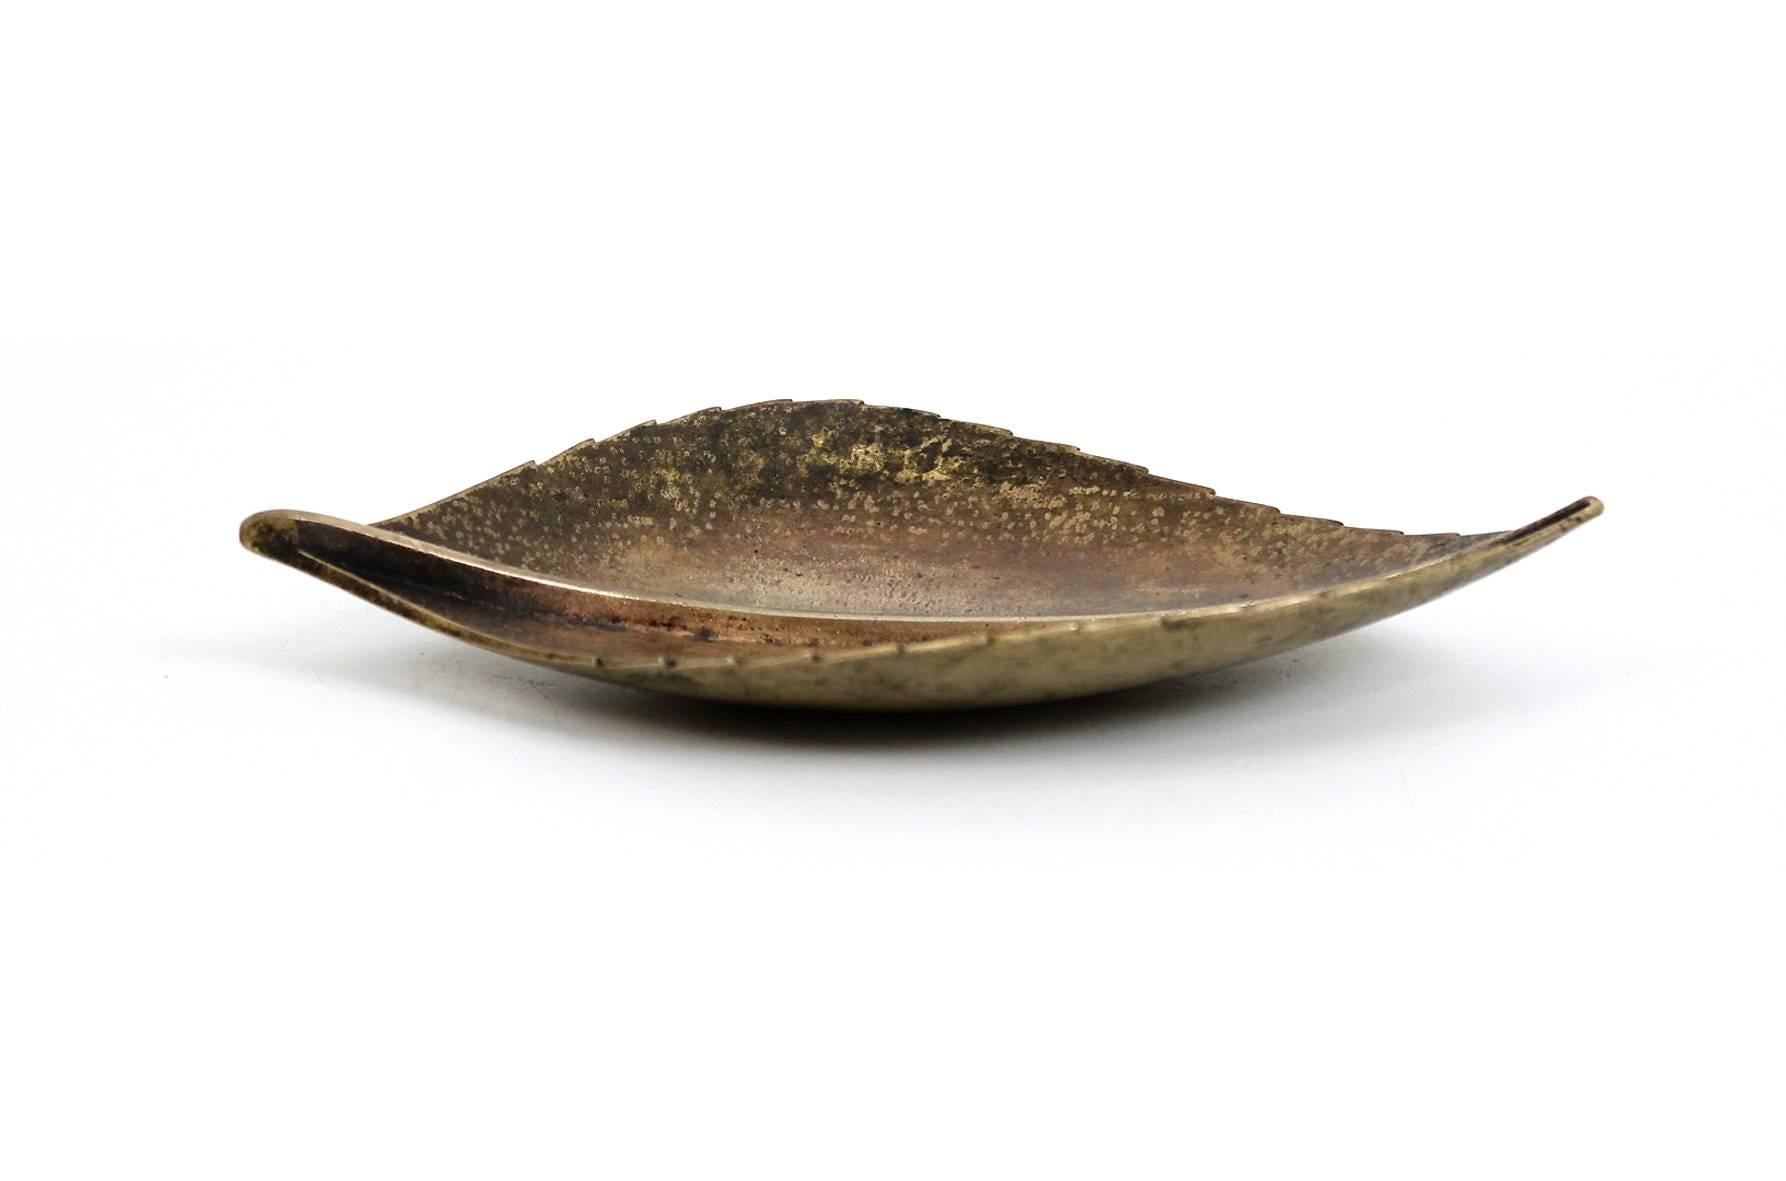 Carl Auböck patinated brass leaf shaped tray. This is model 3178. Signed with Auböck Austria impressed mark to the underside.